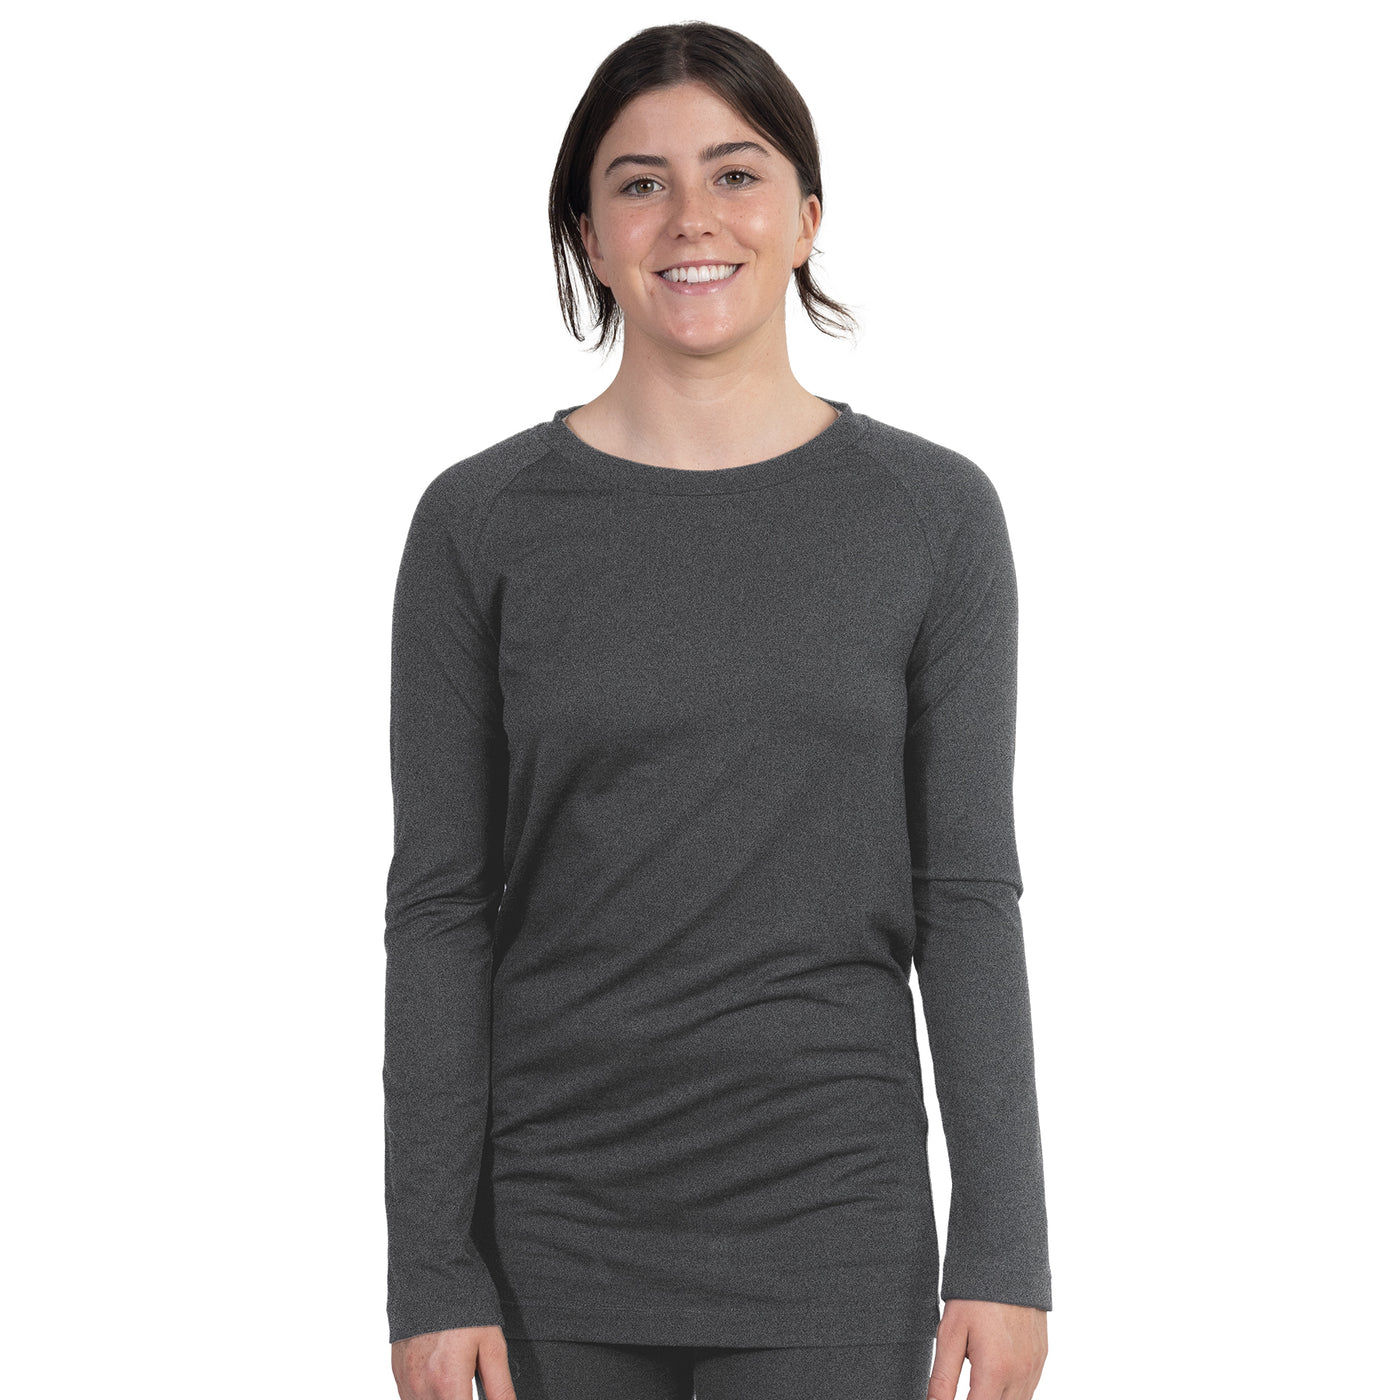 Front shot of Ottie Merino women's long sleeve thermal top in Charcoal Marle colour